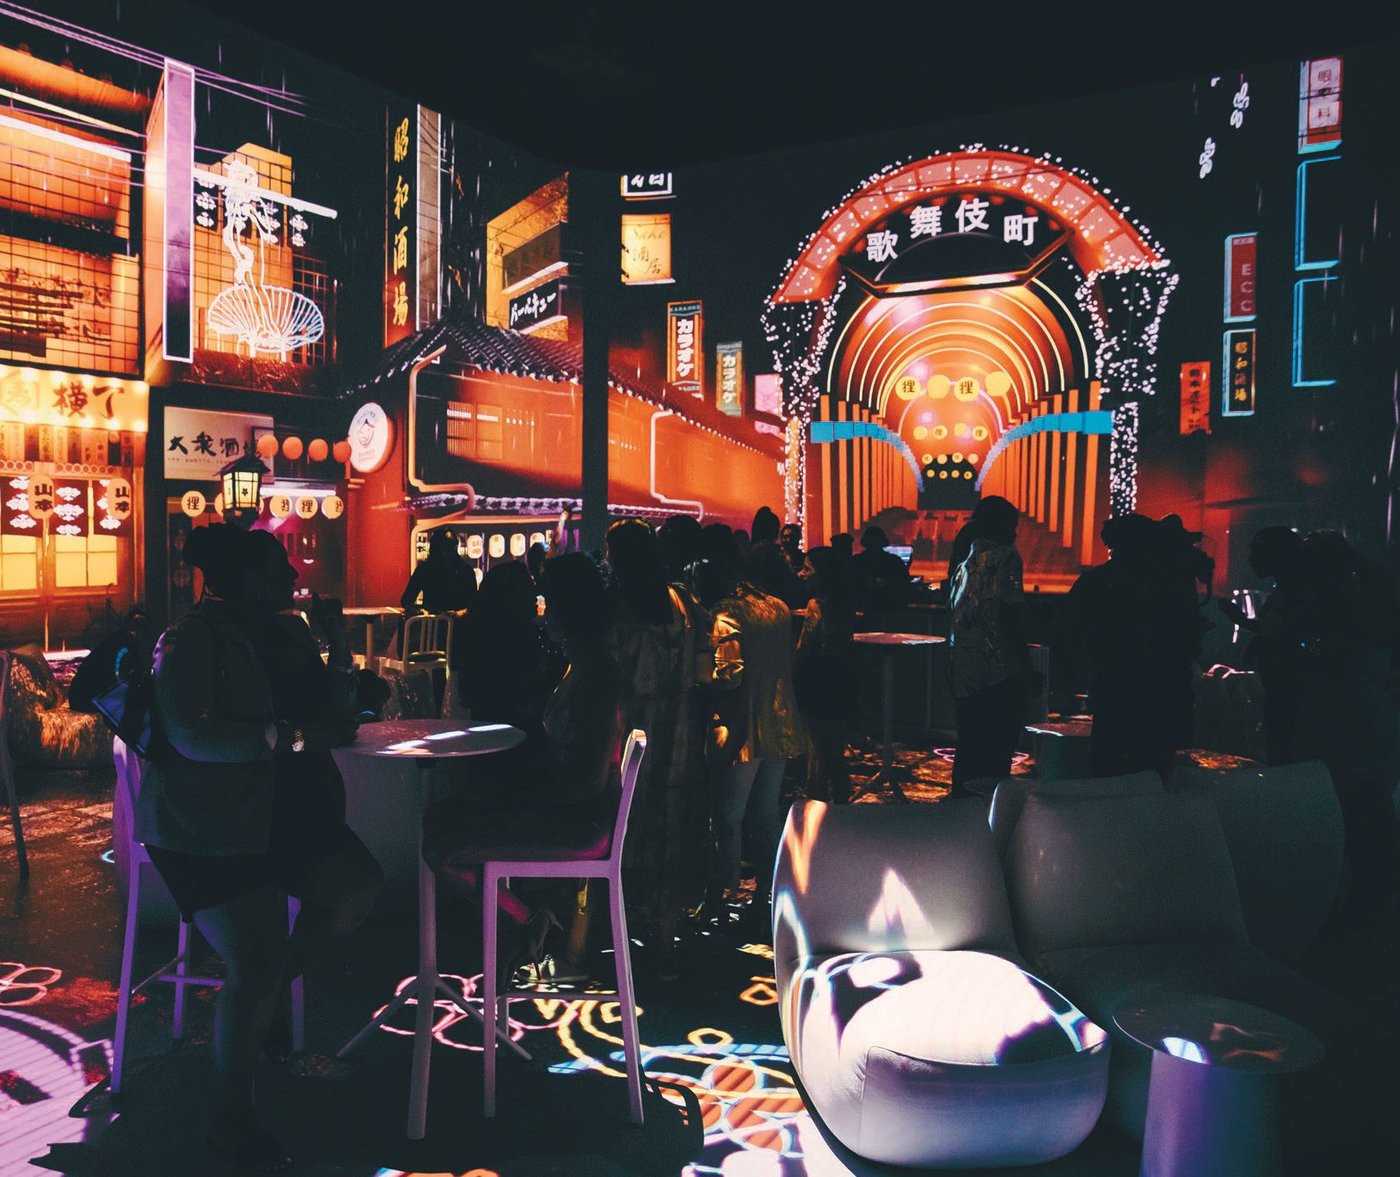 Shibuya Night Market transports diners to a glowing neon night market in Tokyo with fluorescent lights, lanterns and holograms that animate the Japanese architecture. PHOTO BY JORDAN VIISION FOR ROCKWELL GROUP